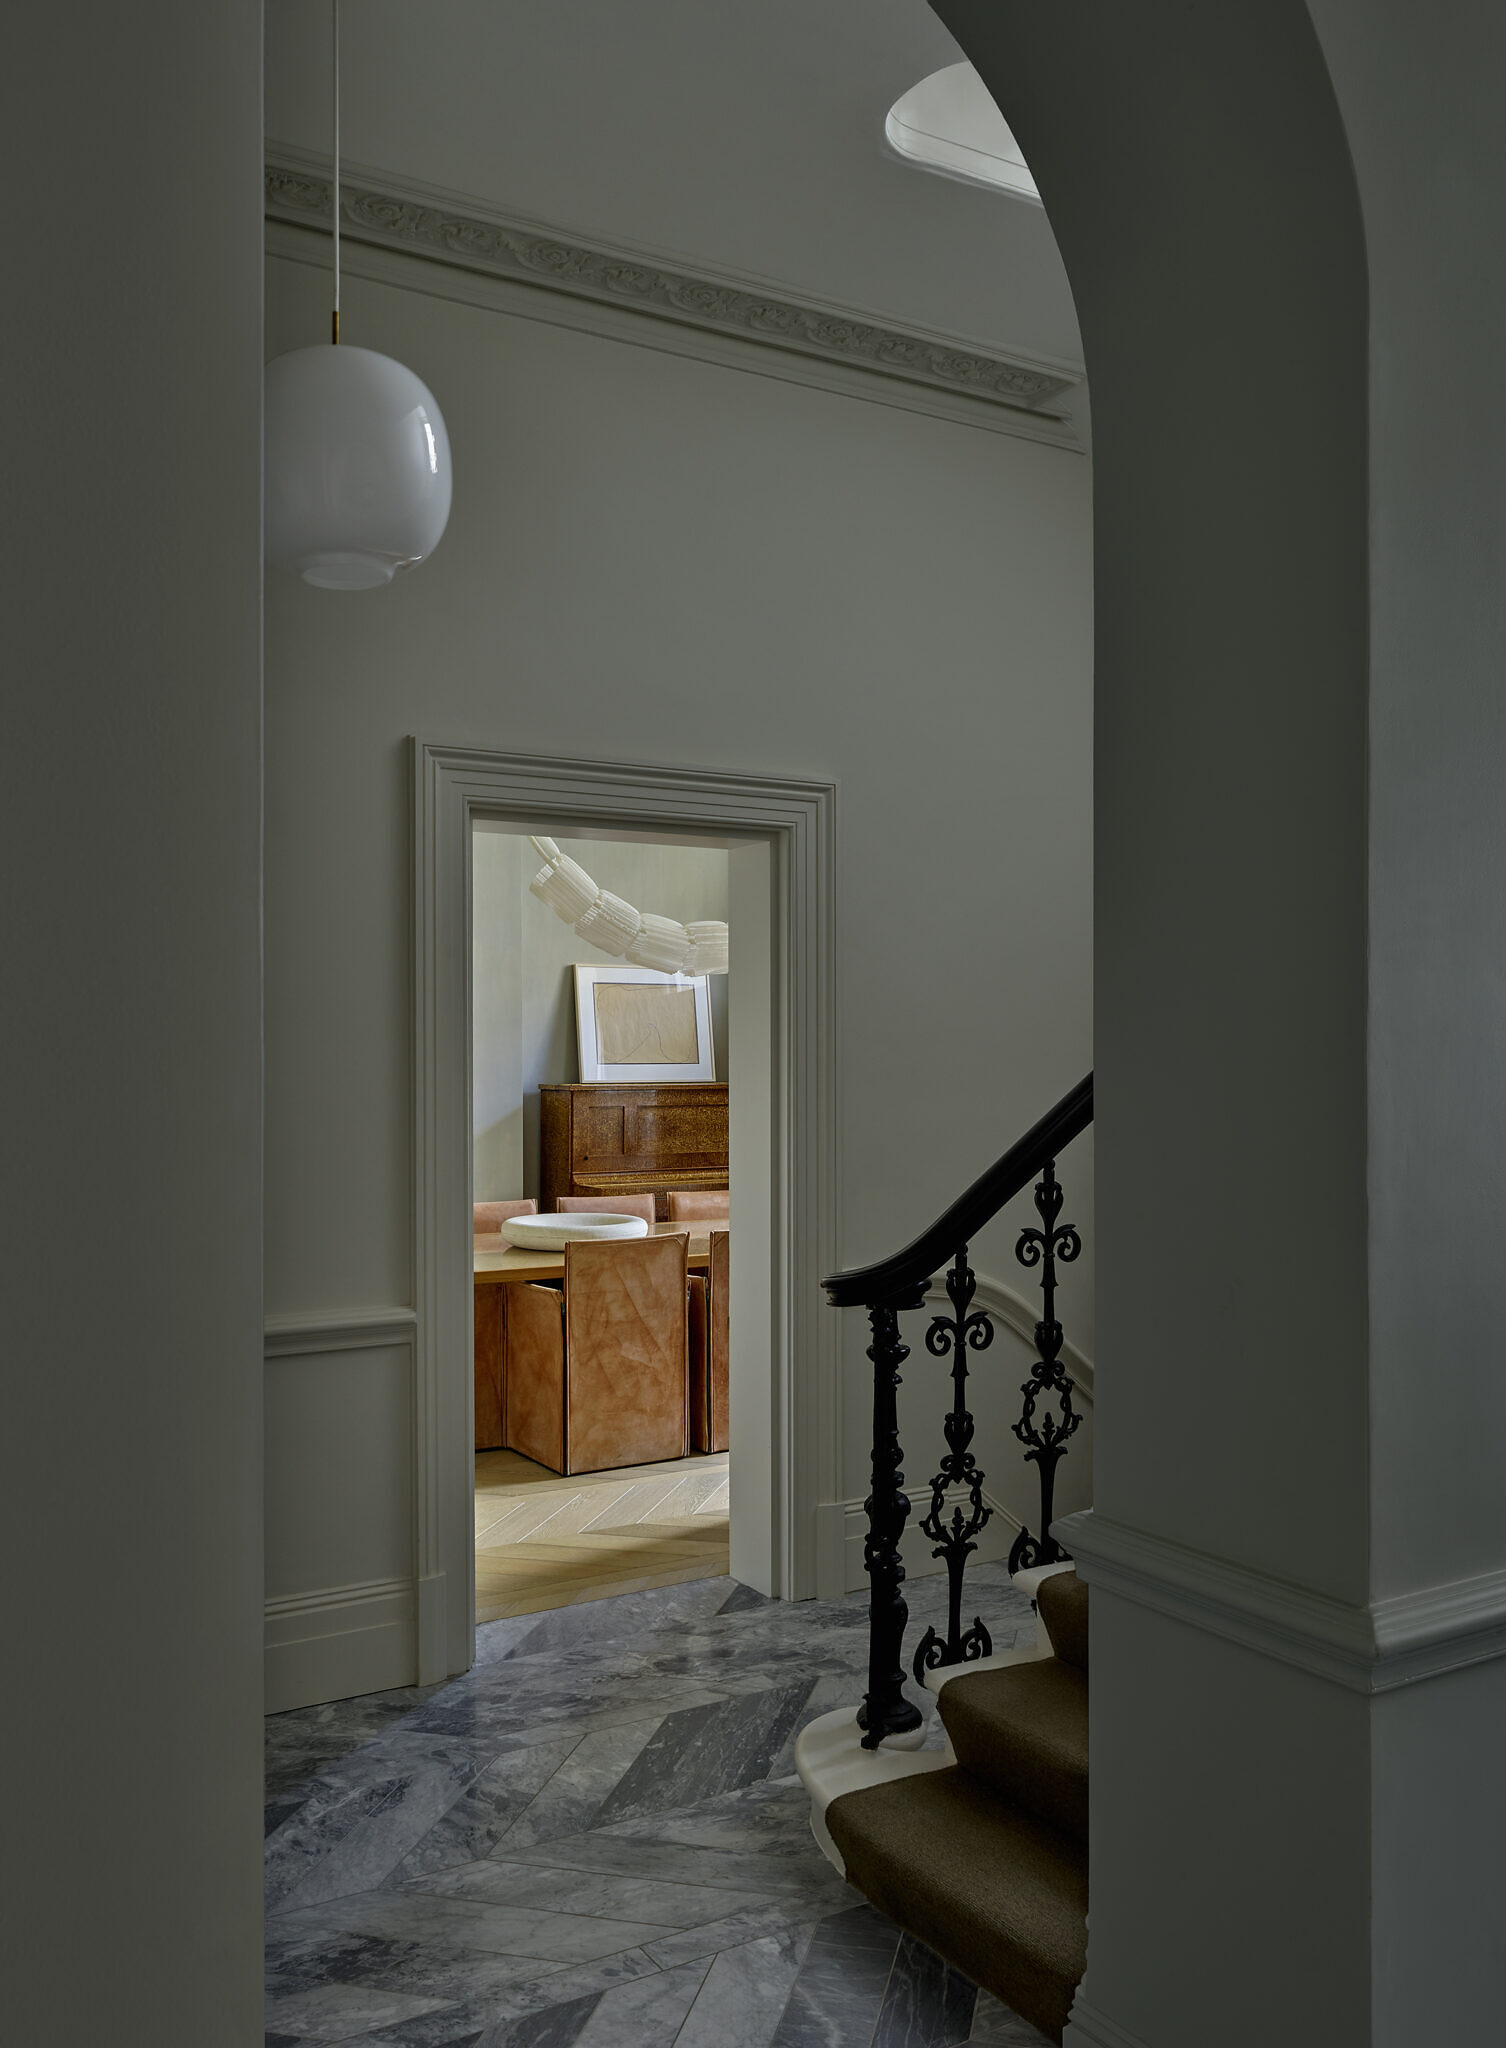 Hallway image showing the staircase, a white bulb lamp hanging above, and the dining room peeking through across the image.